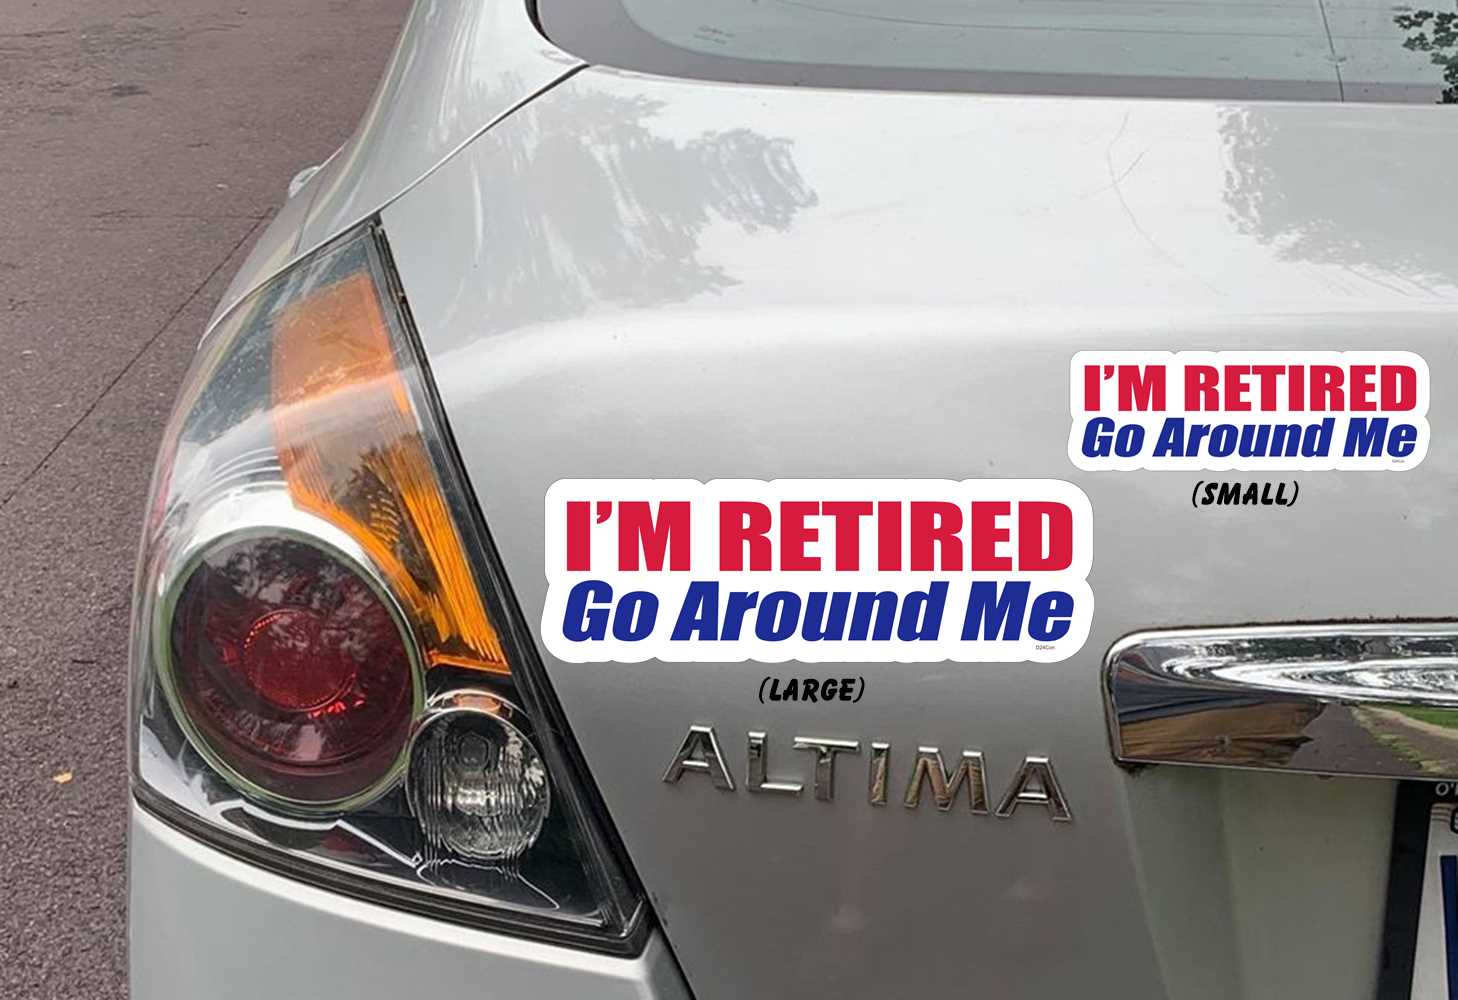 I'M RETIRED. GO AROUND ME - FUNNY BUMPER STICKERS ON CAR